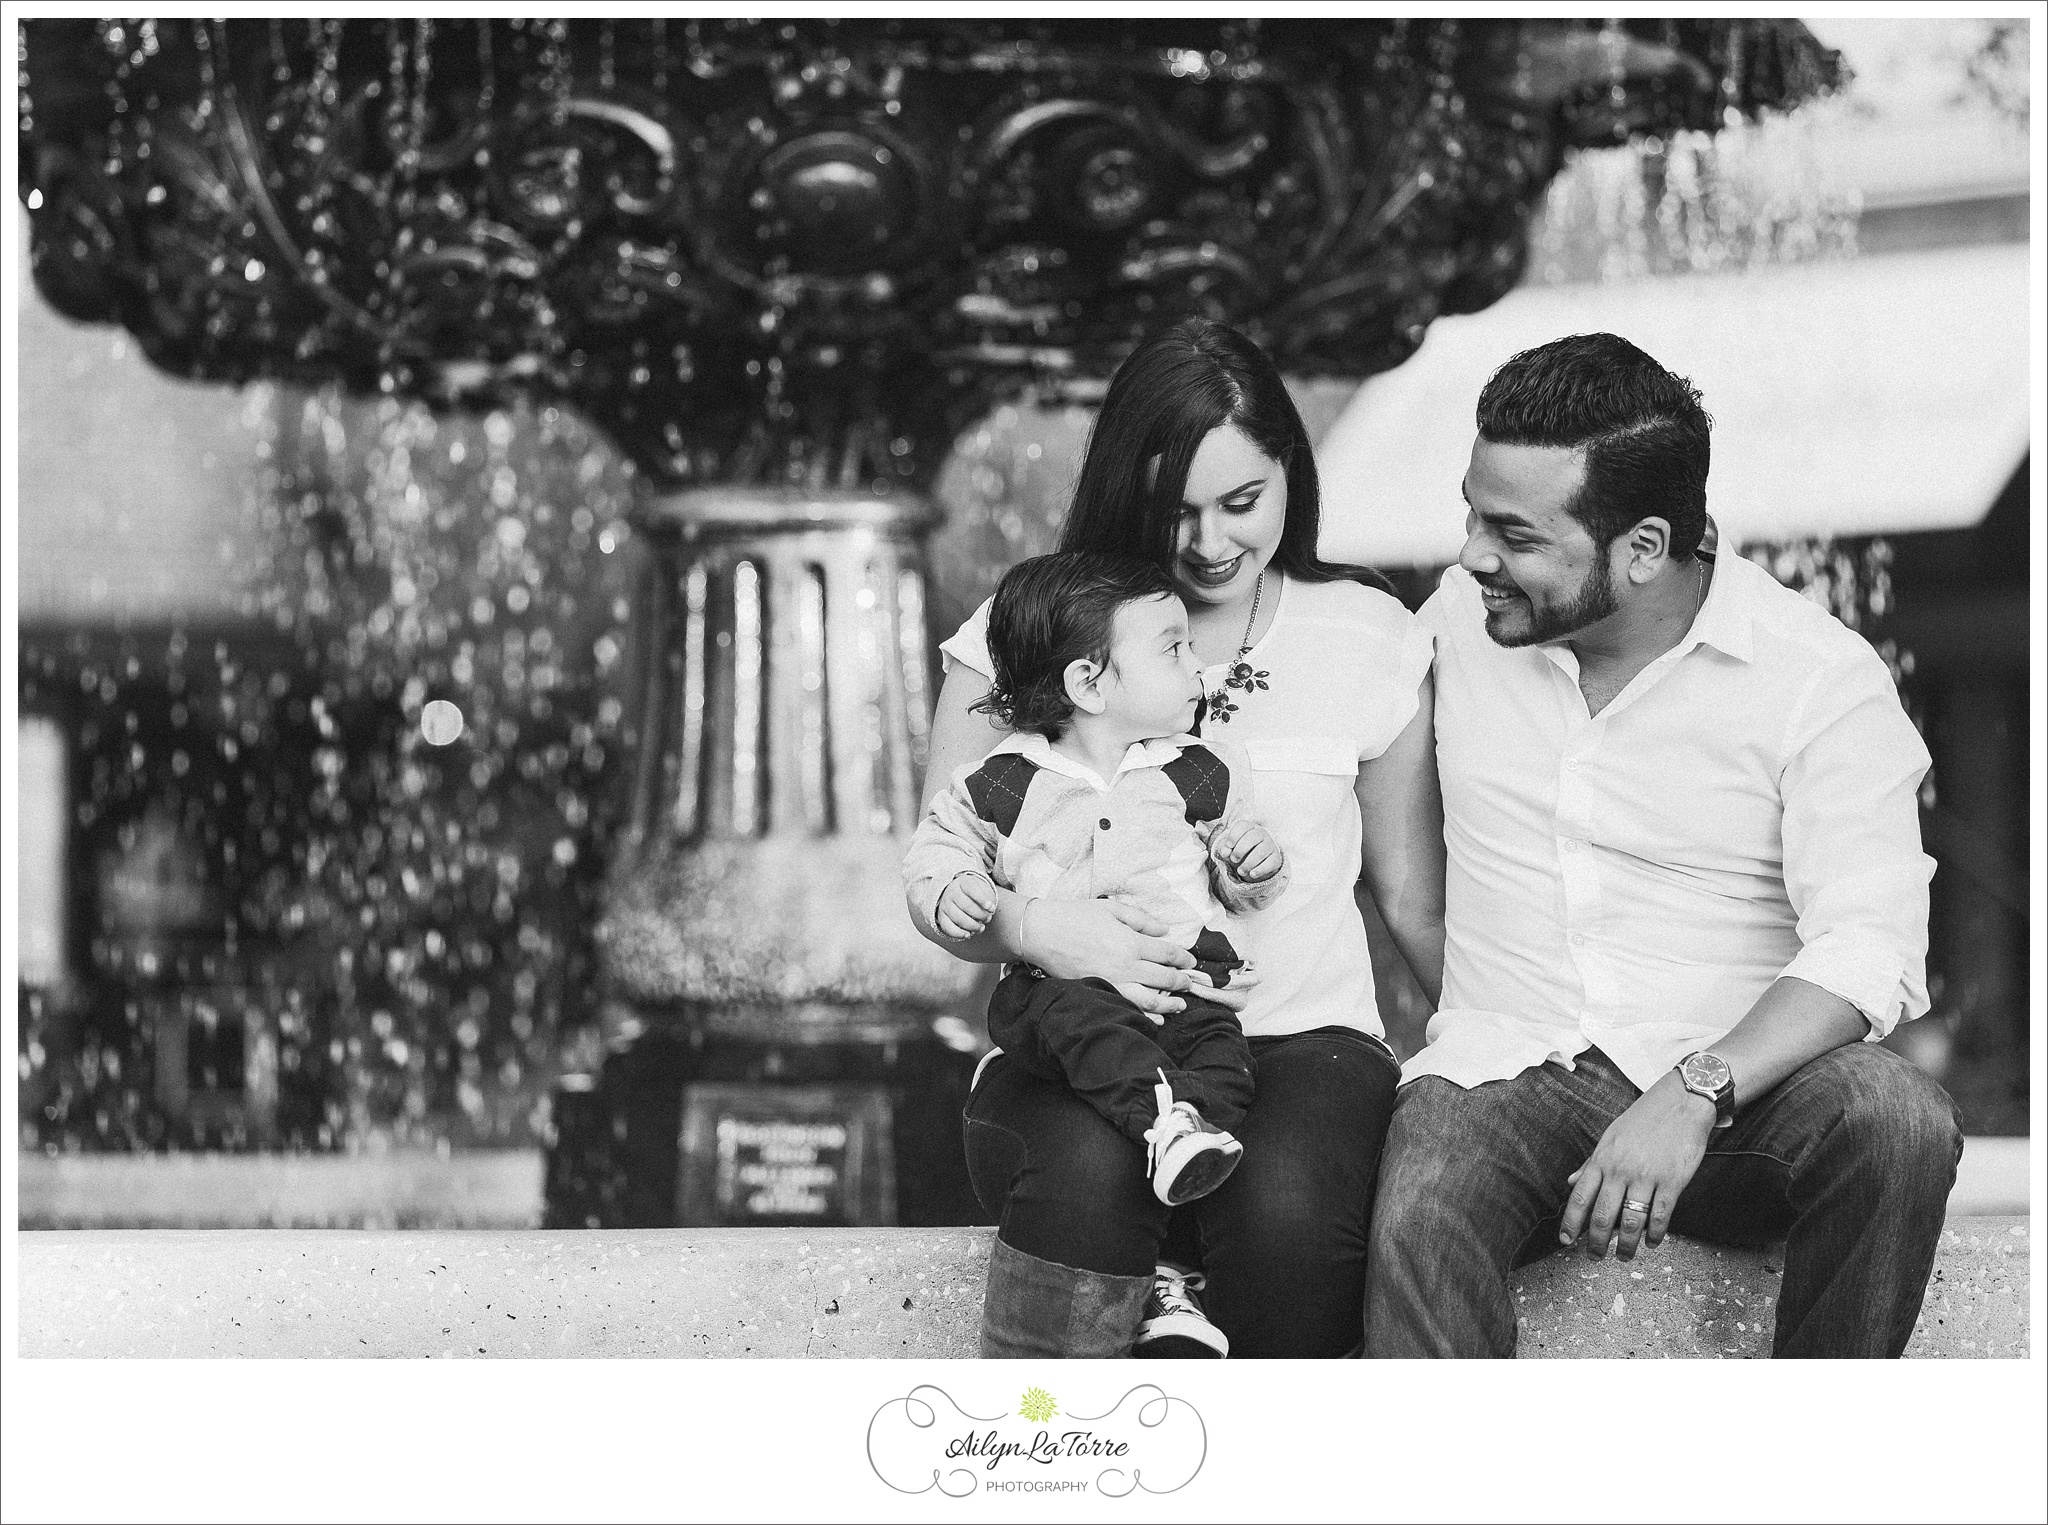 Old Hyde Park Family Photographer | © Ailyn La Torre Photography 2014